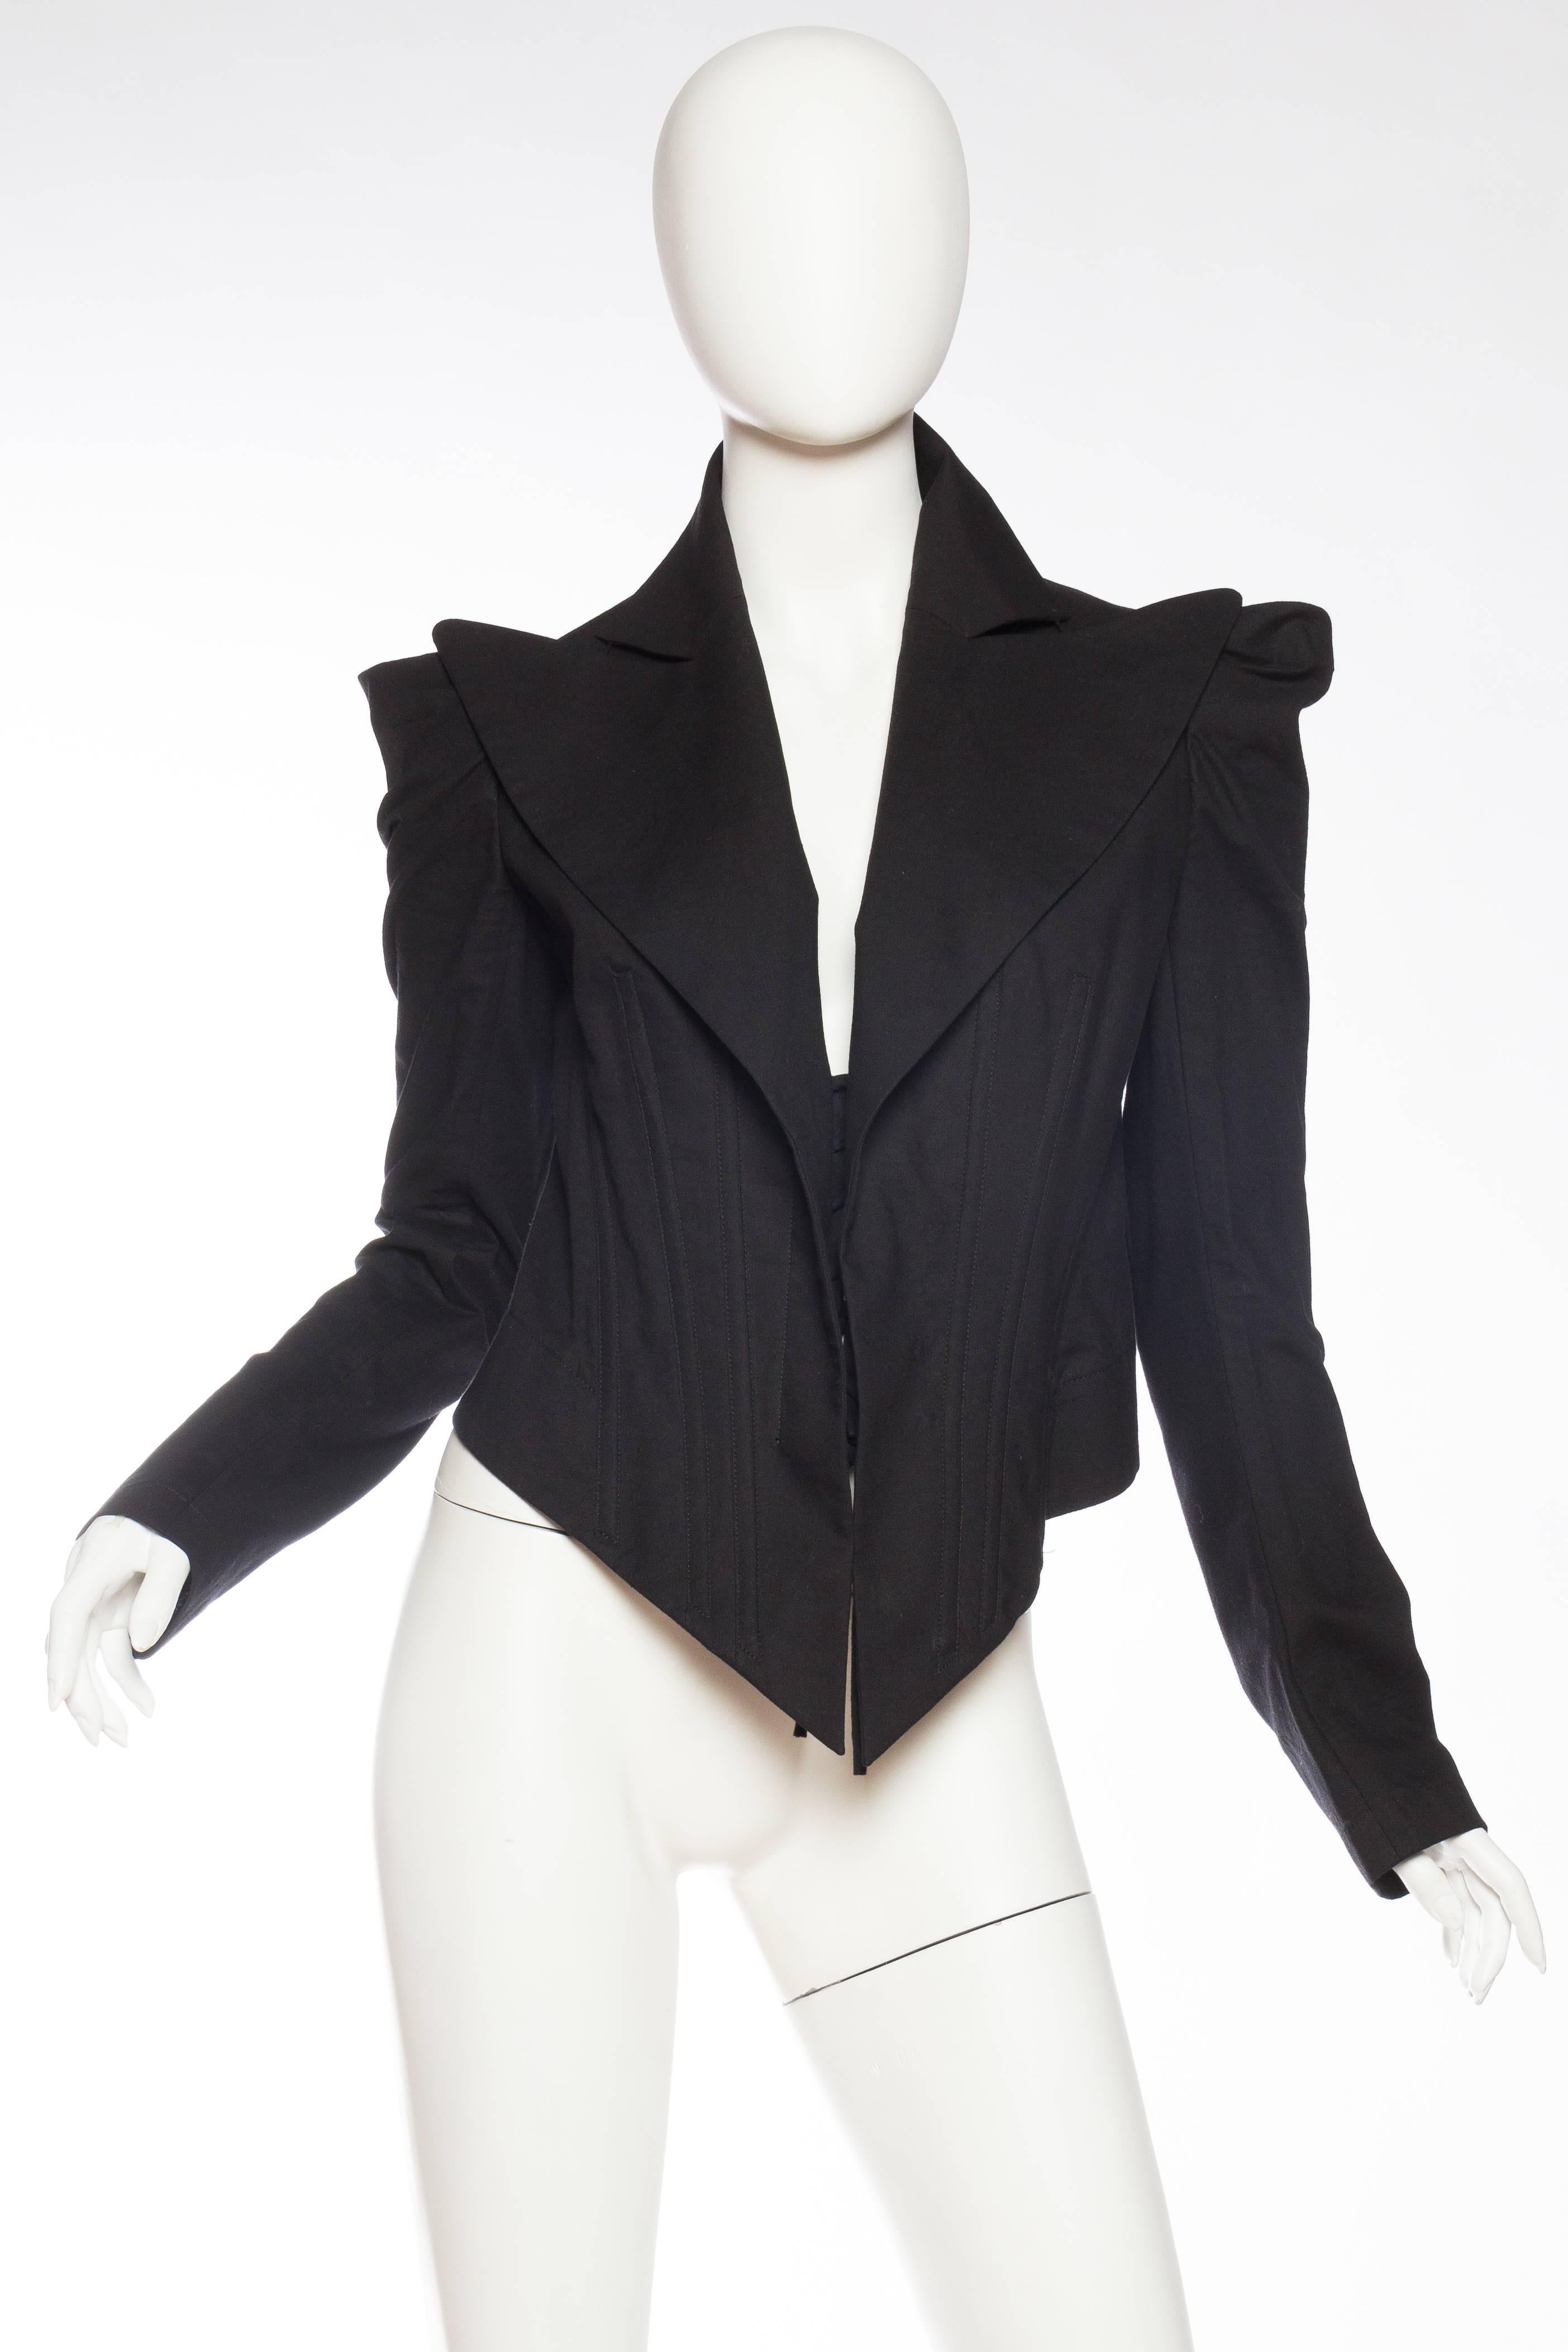 Blazer has winged shoulders, wide lapels and is fully boned like a corset, fits a large size as well as it can be laces tight up the front. 